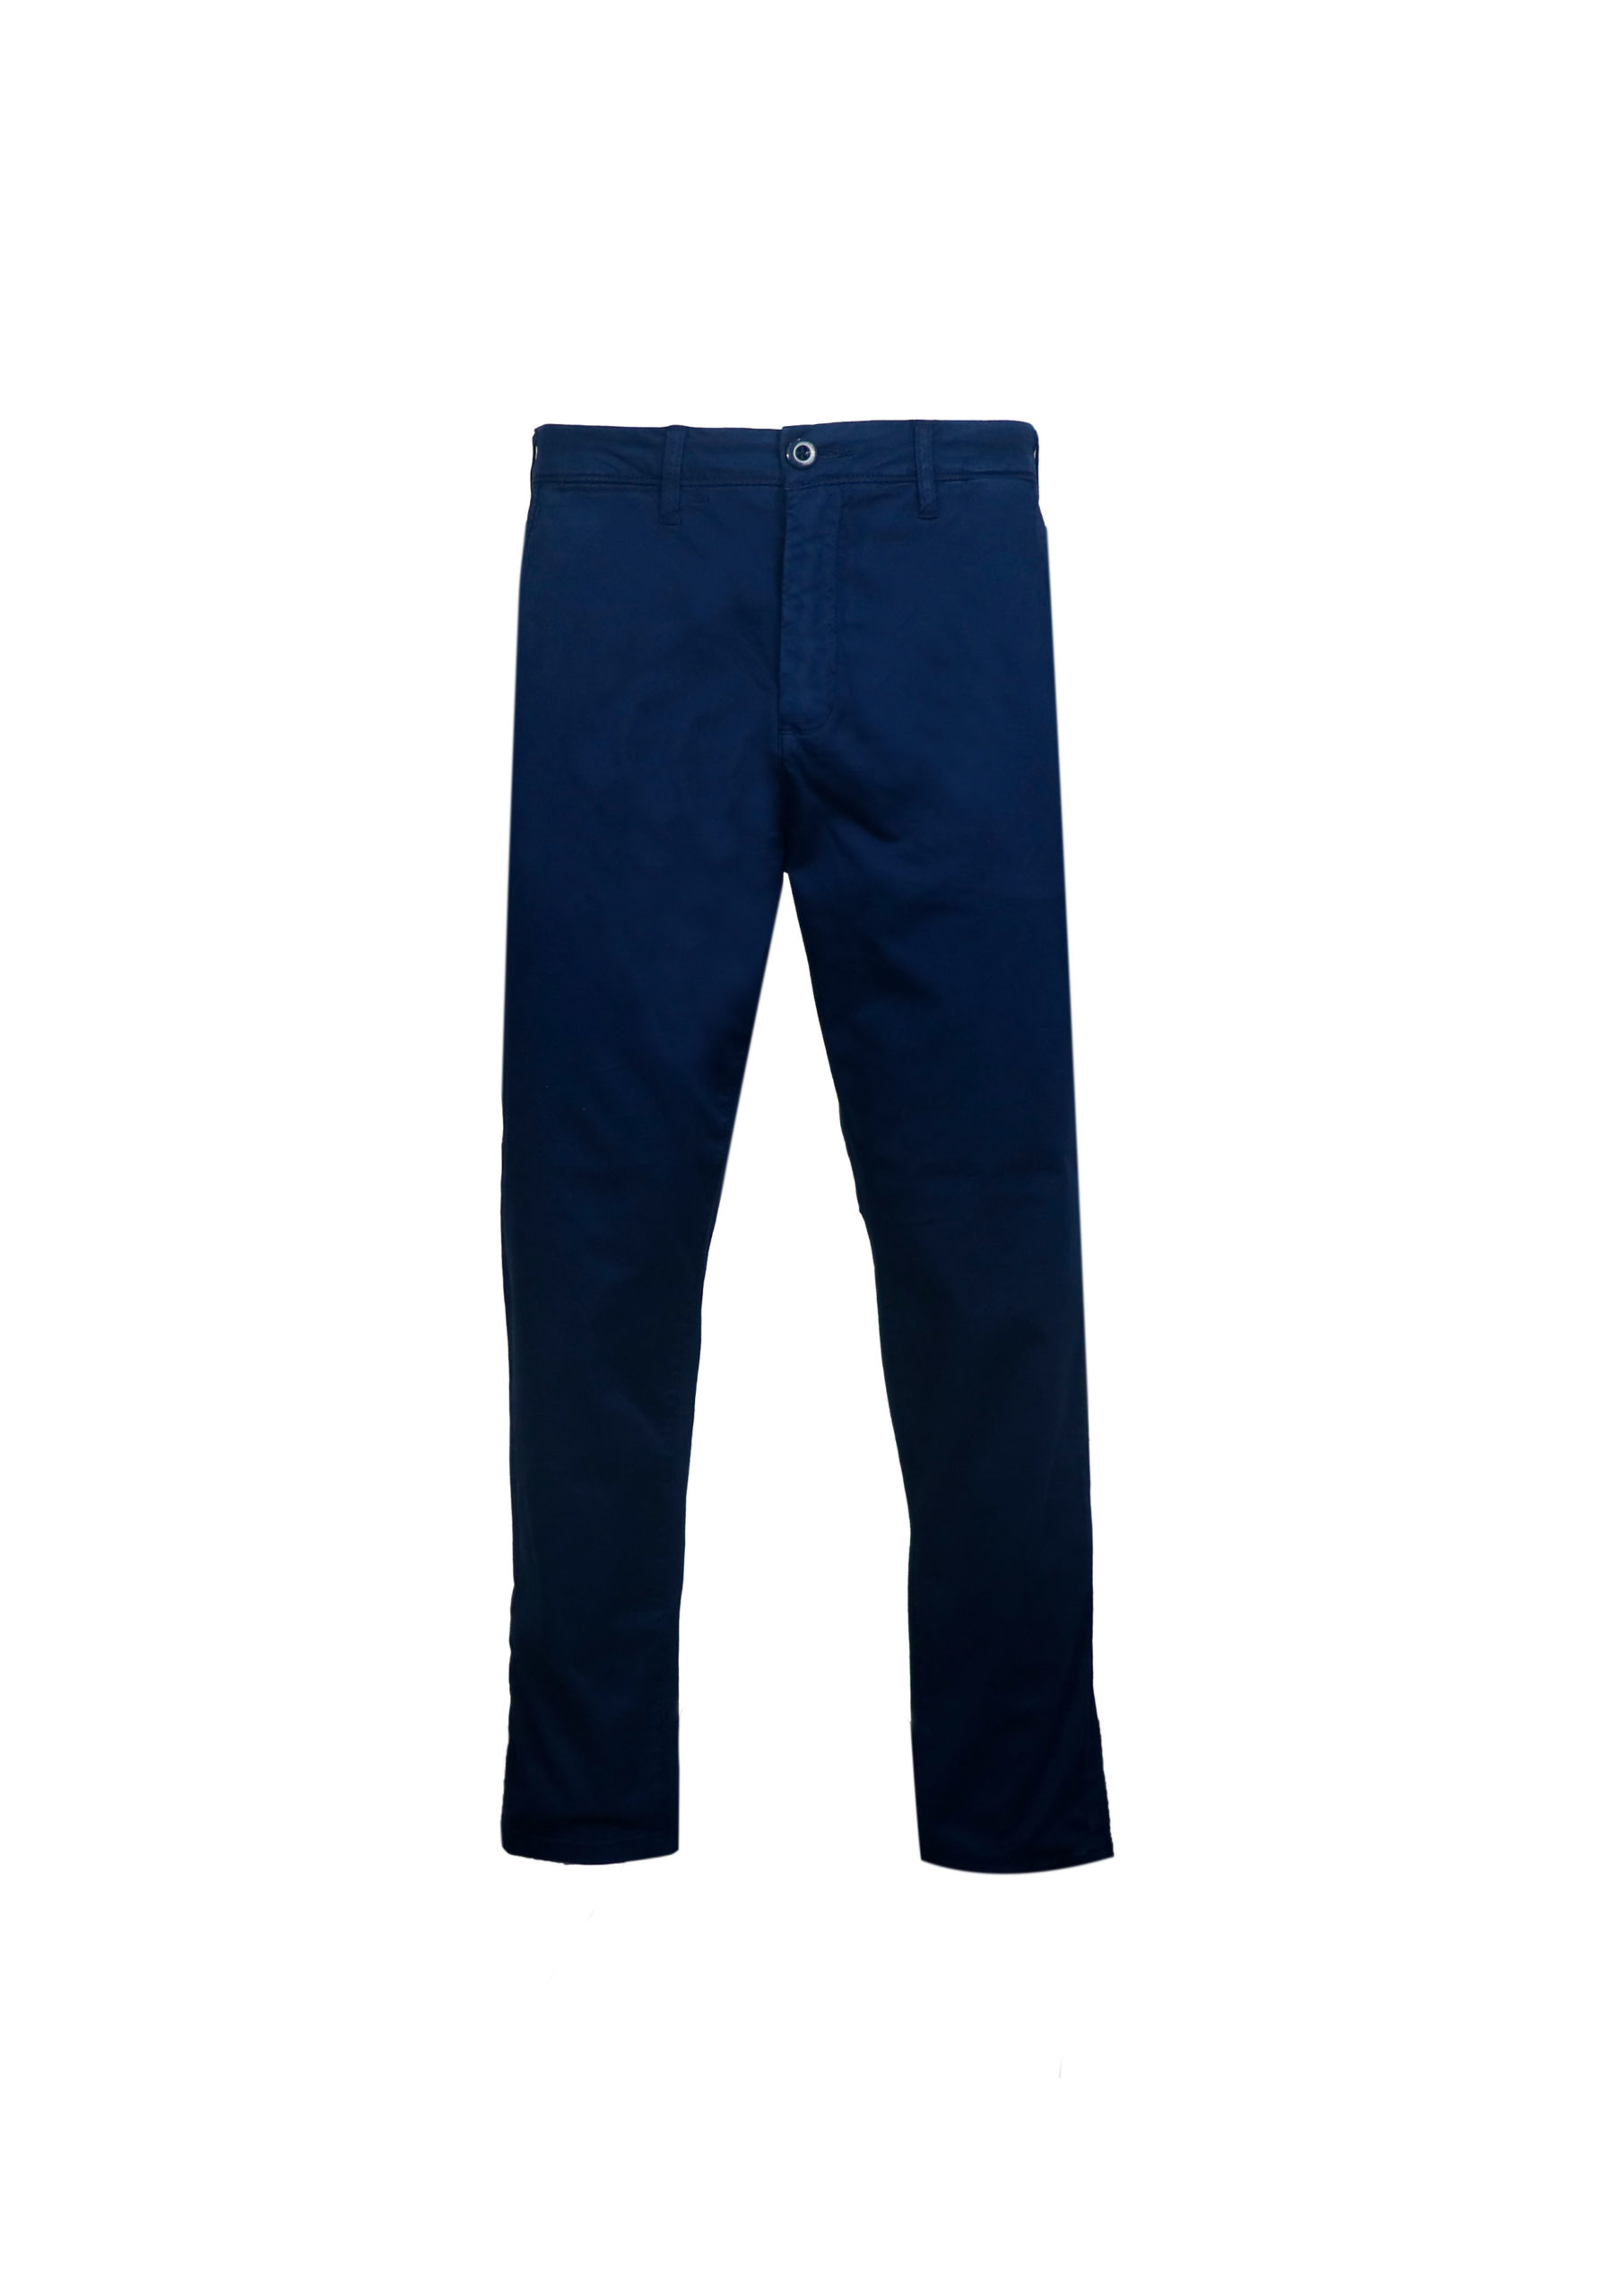 Men's Twill Pant - Artisan Outfitters Ltd